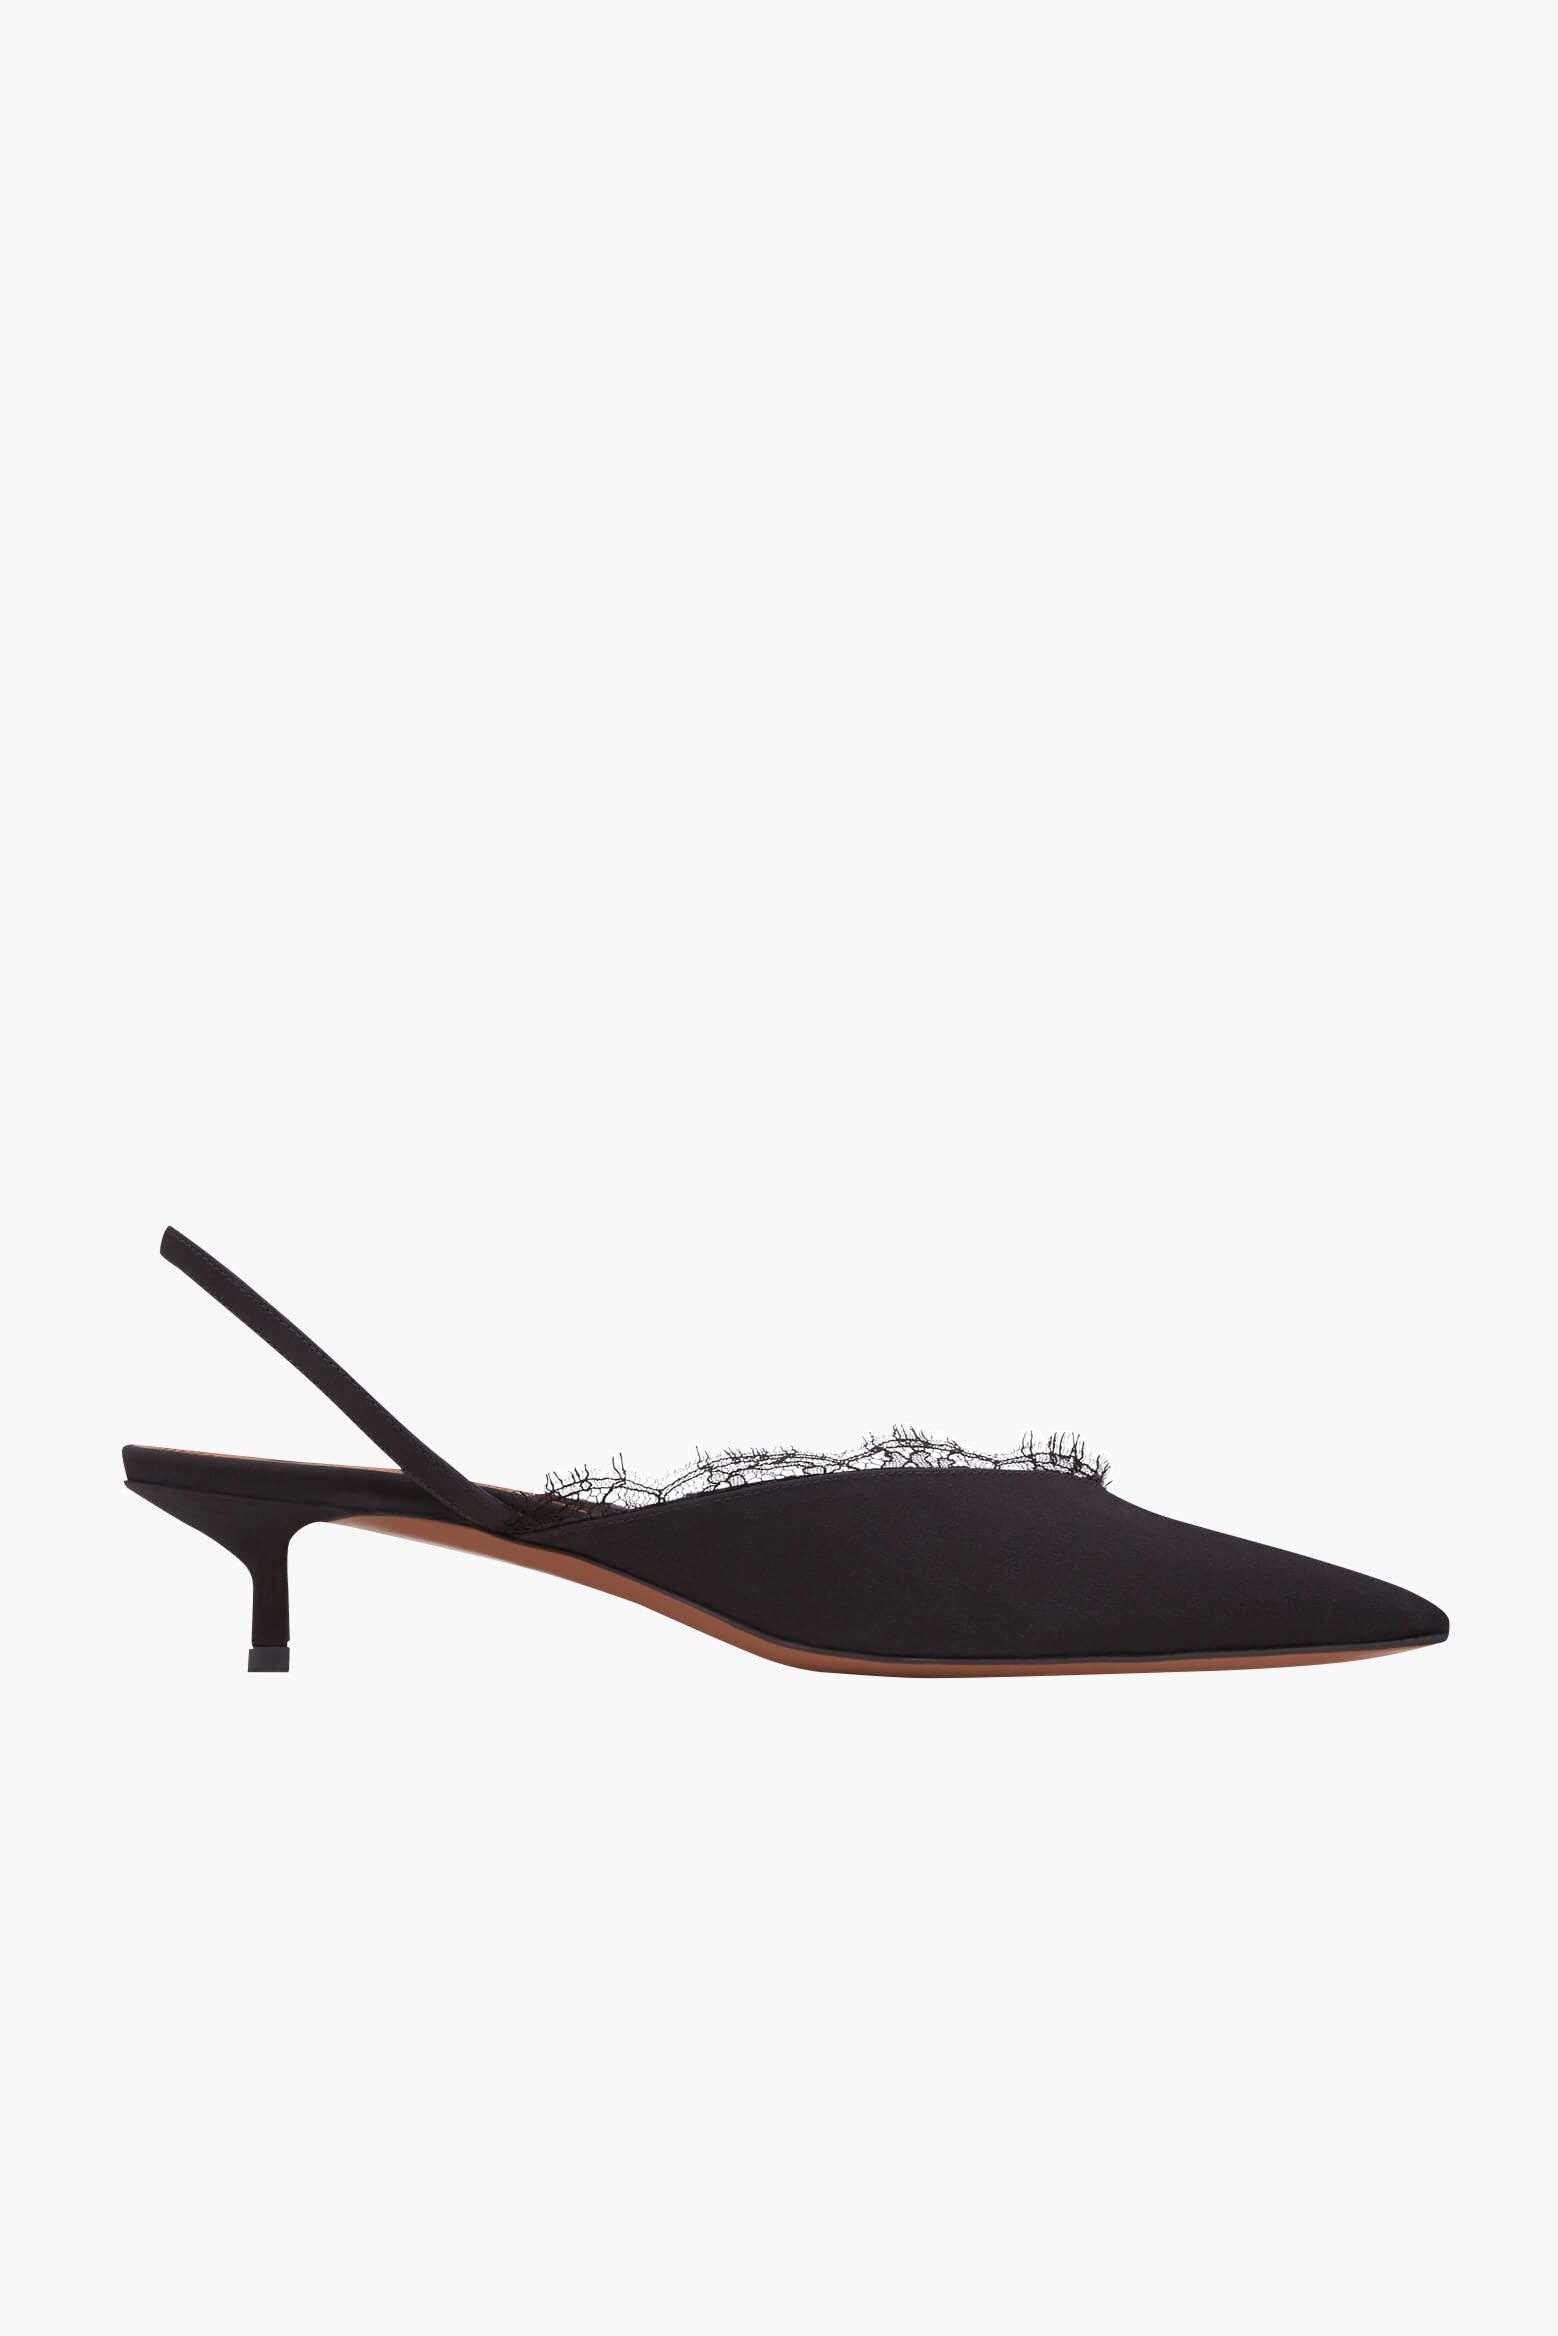 Neous Irena Slingback Mule in Black available at TNT The New Trend Australia.